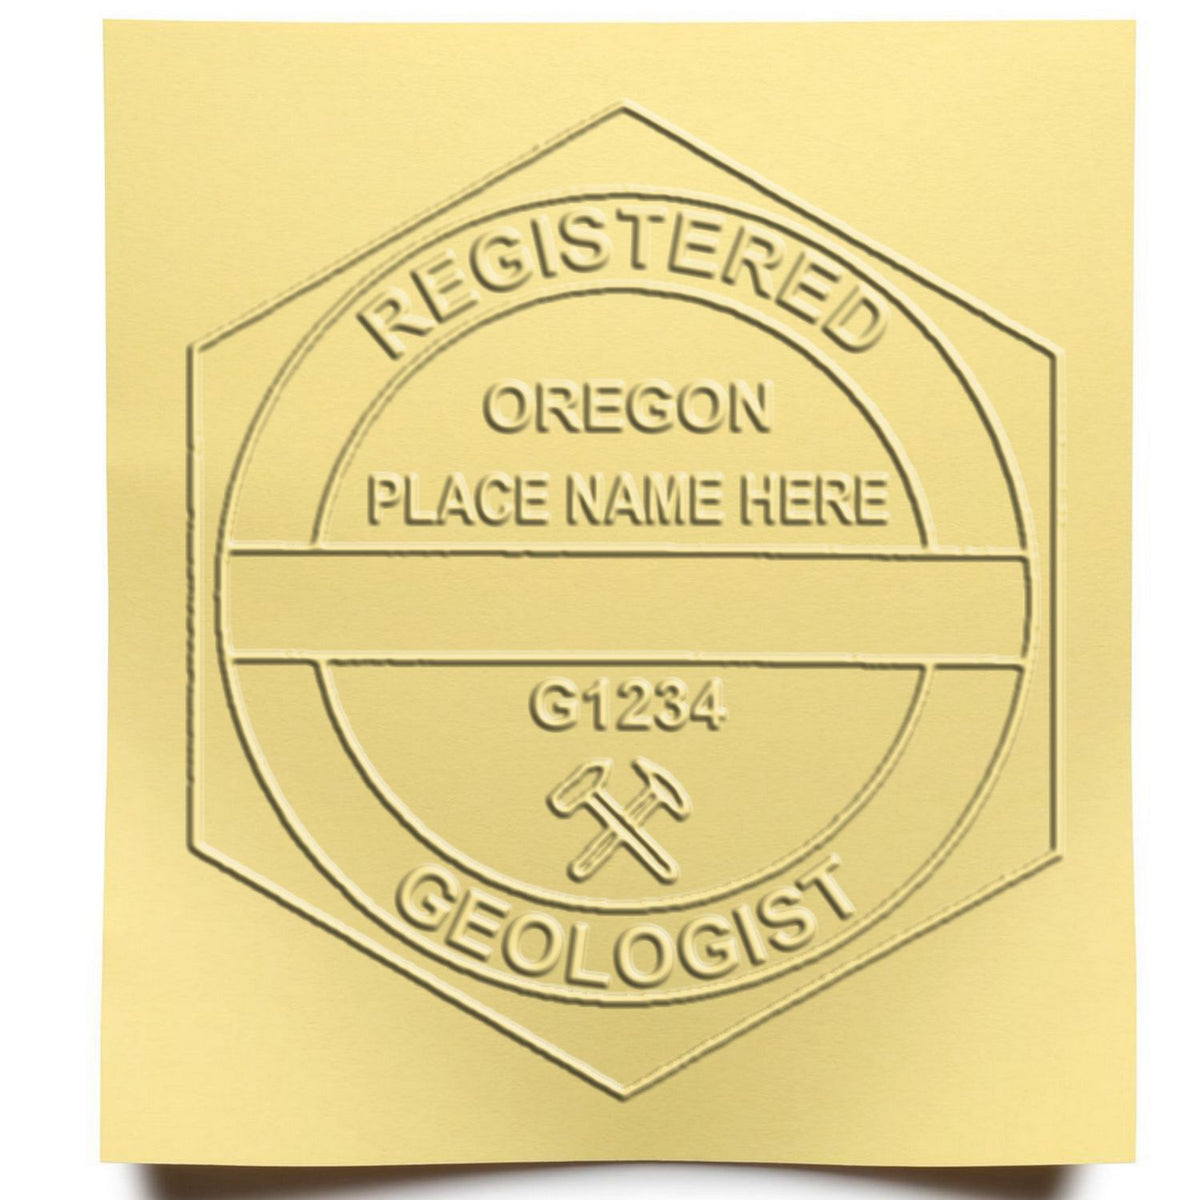 An in use photo of the State of Oregon Extended Long Reach Geologist Seal showing a sample imprint on a cardstock